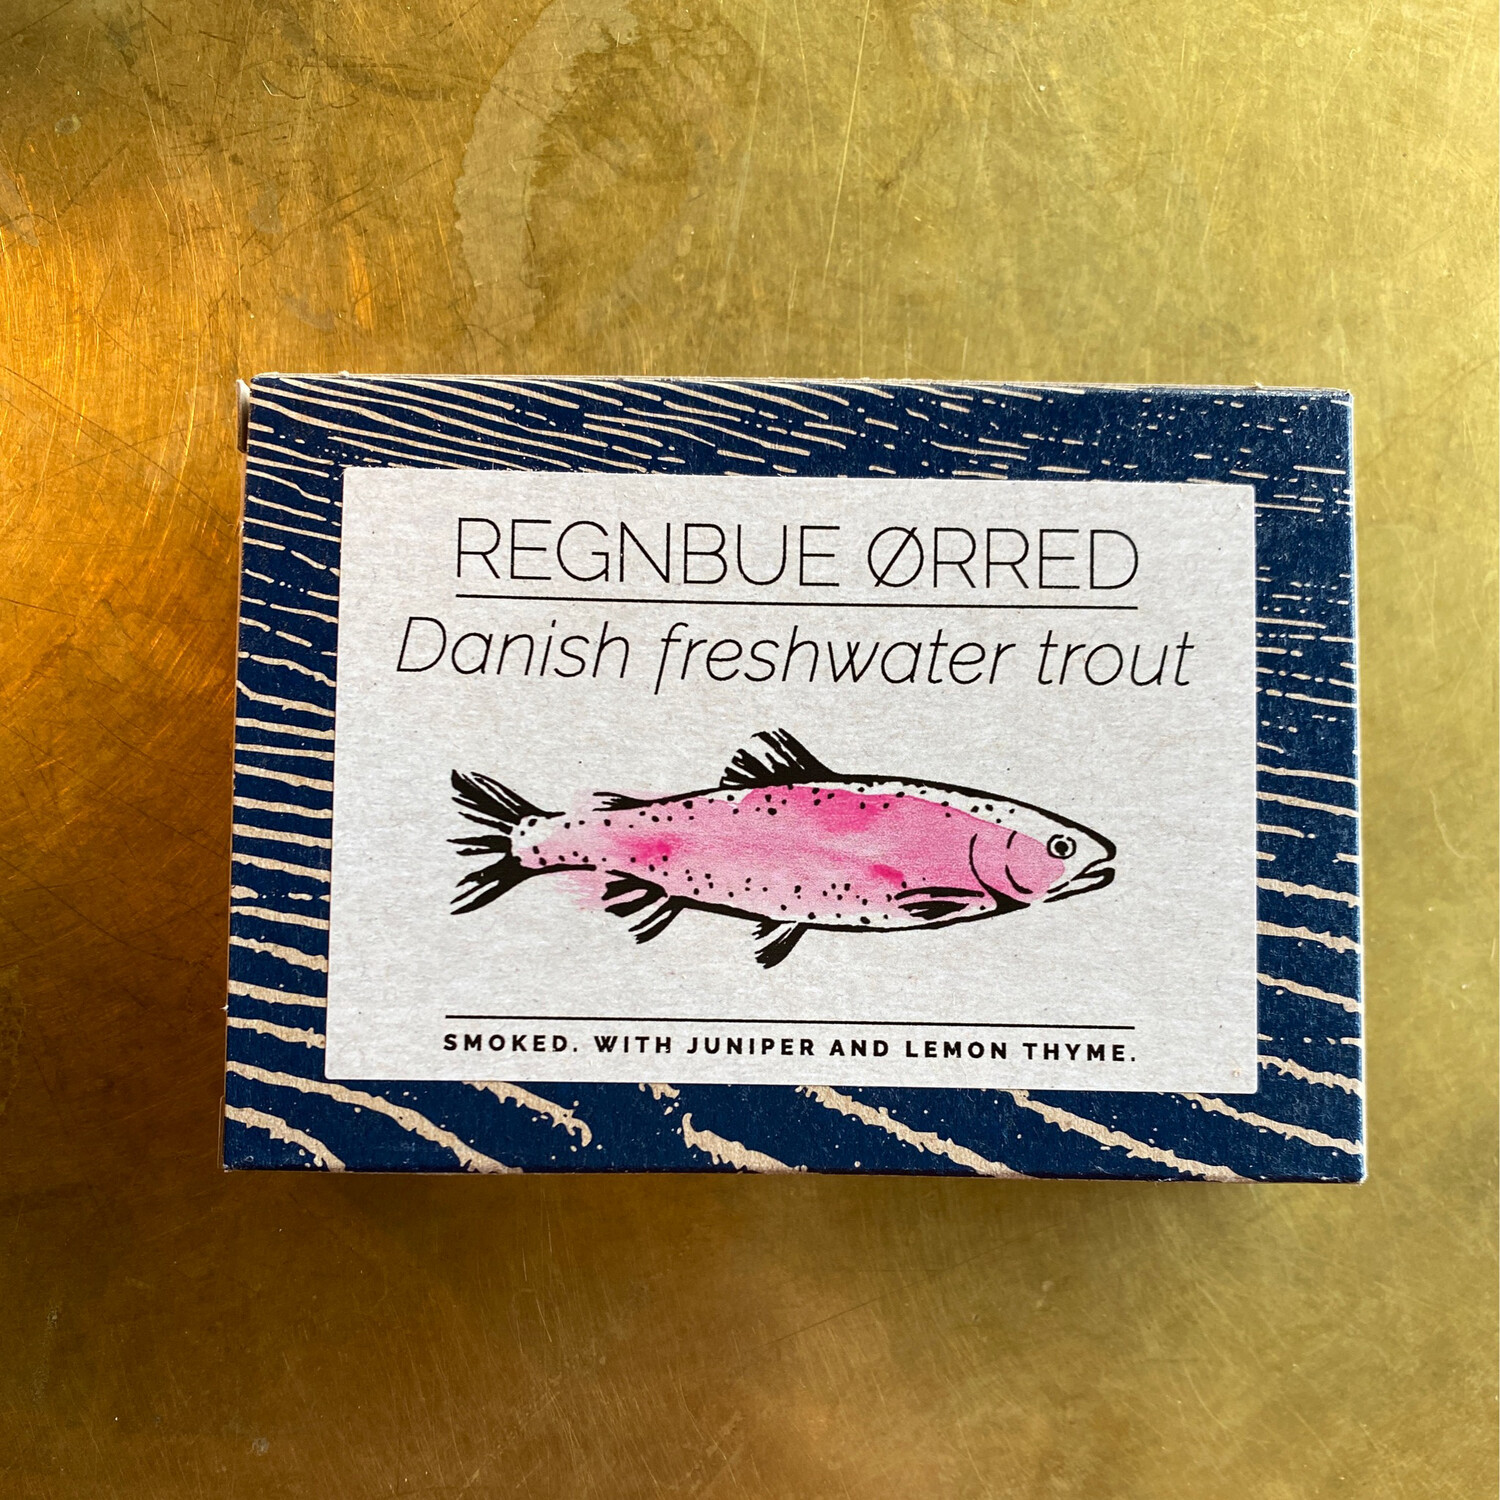 Fangst Regnbue Orred Smoked Freshwater Trout 